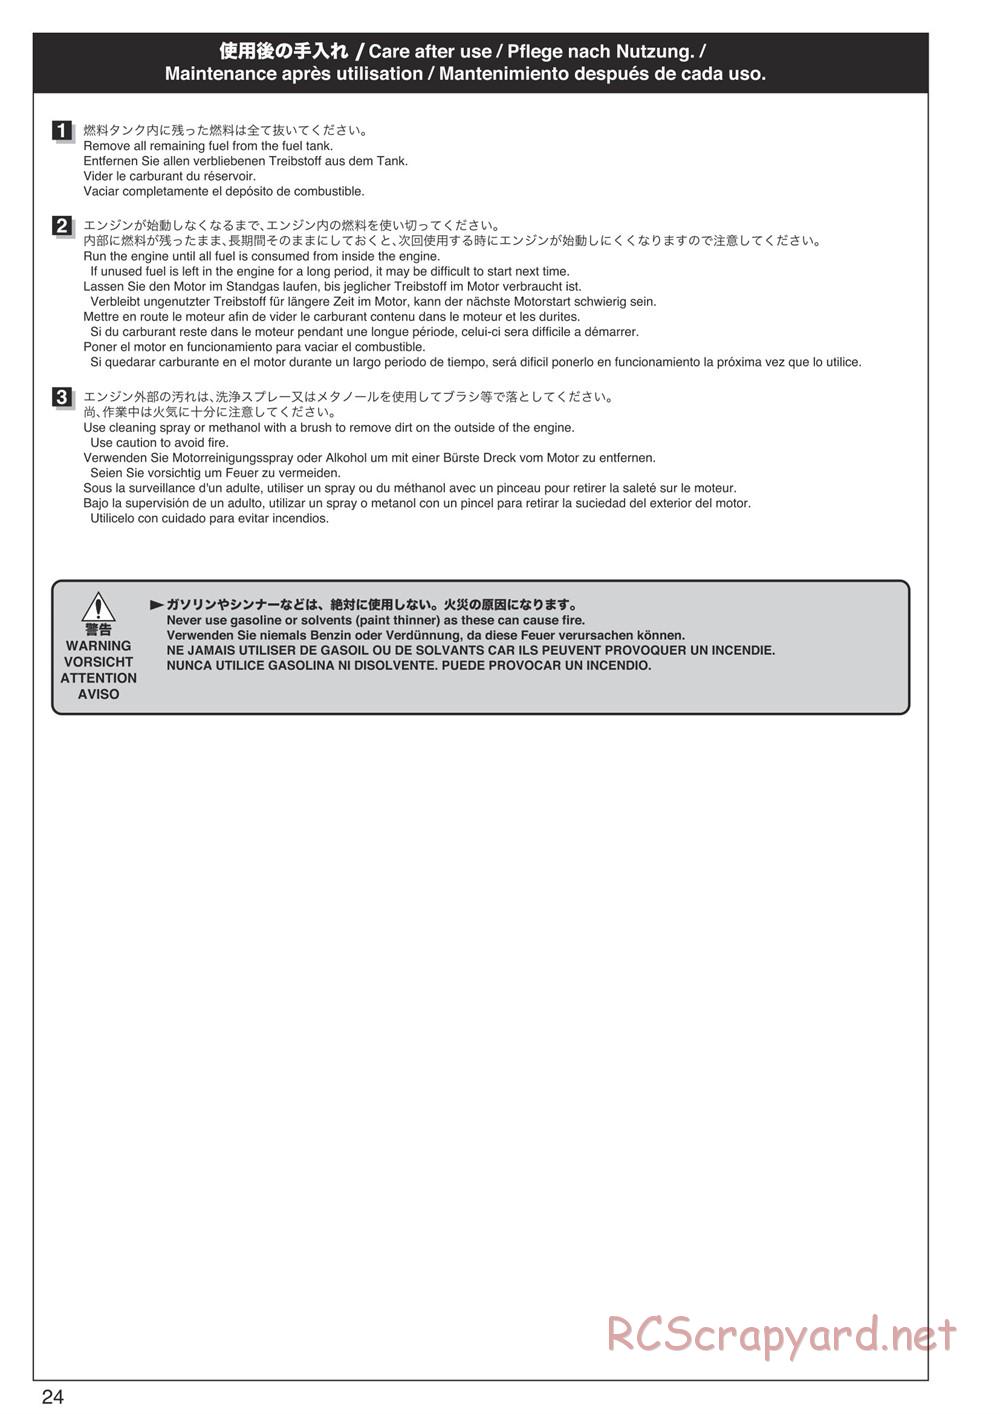 Kyosho - Inferno Neo 3.0 - Manual - Page 24